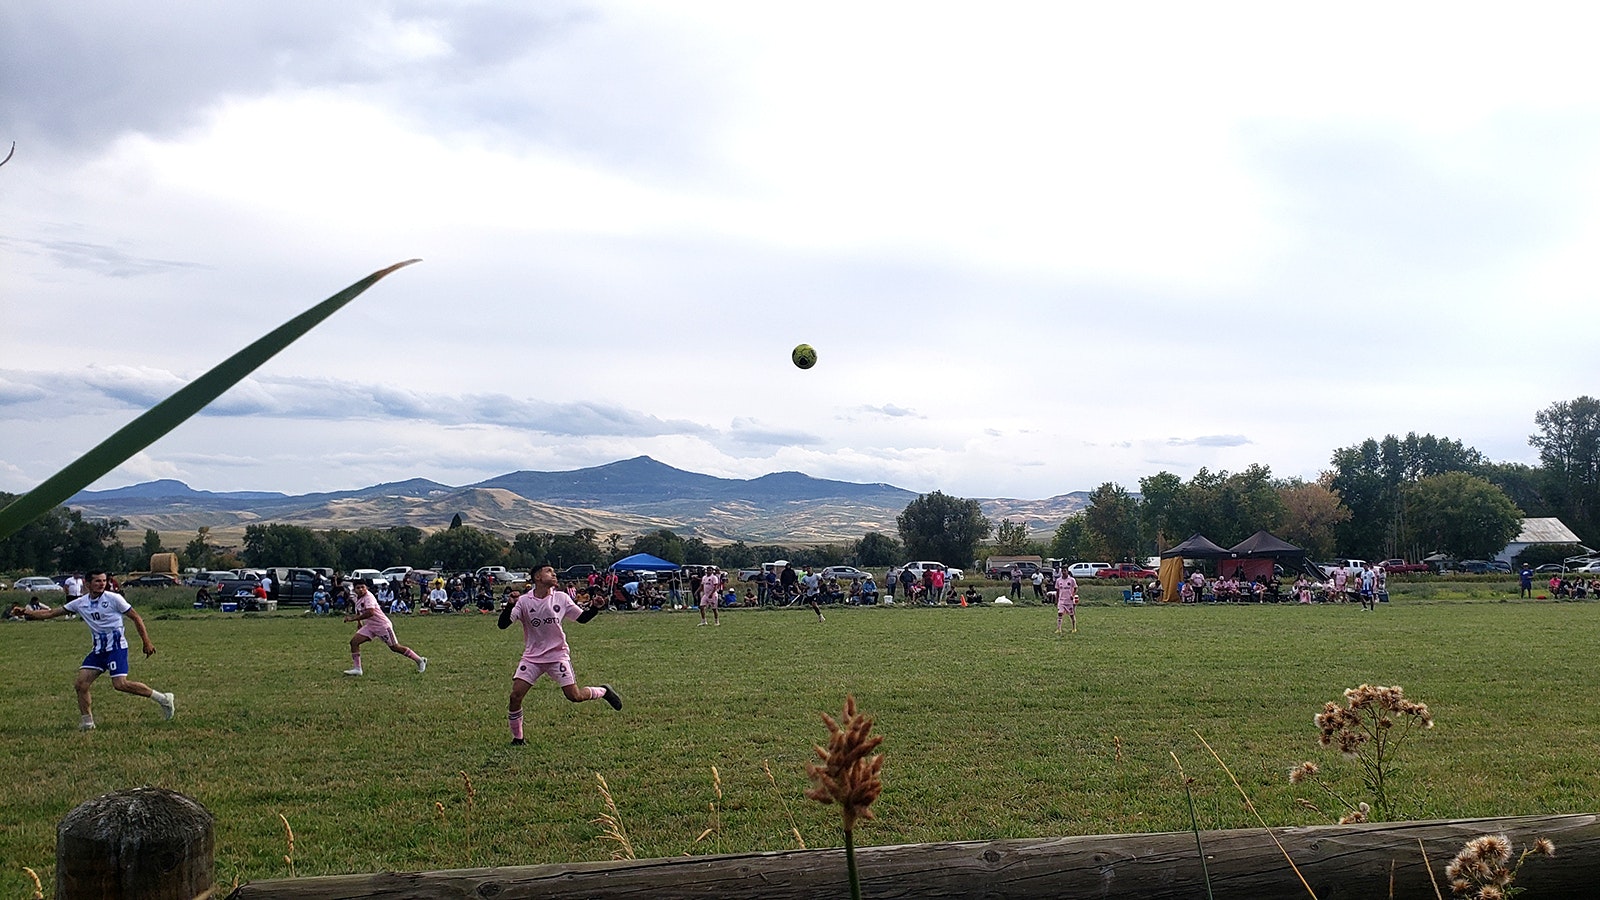 Adjacent to the Savery picnic was a hard-fought soccer match between ranch and soccer club teams.